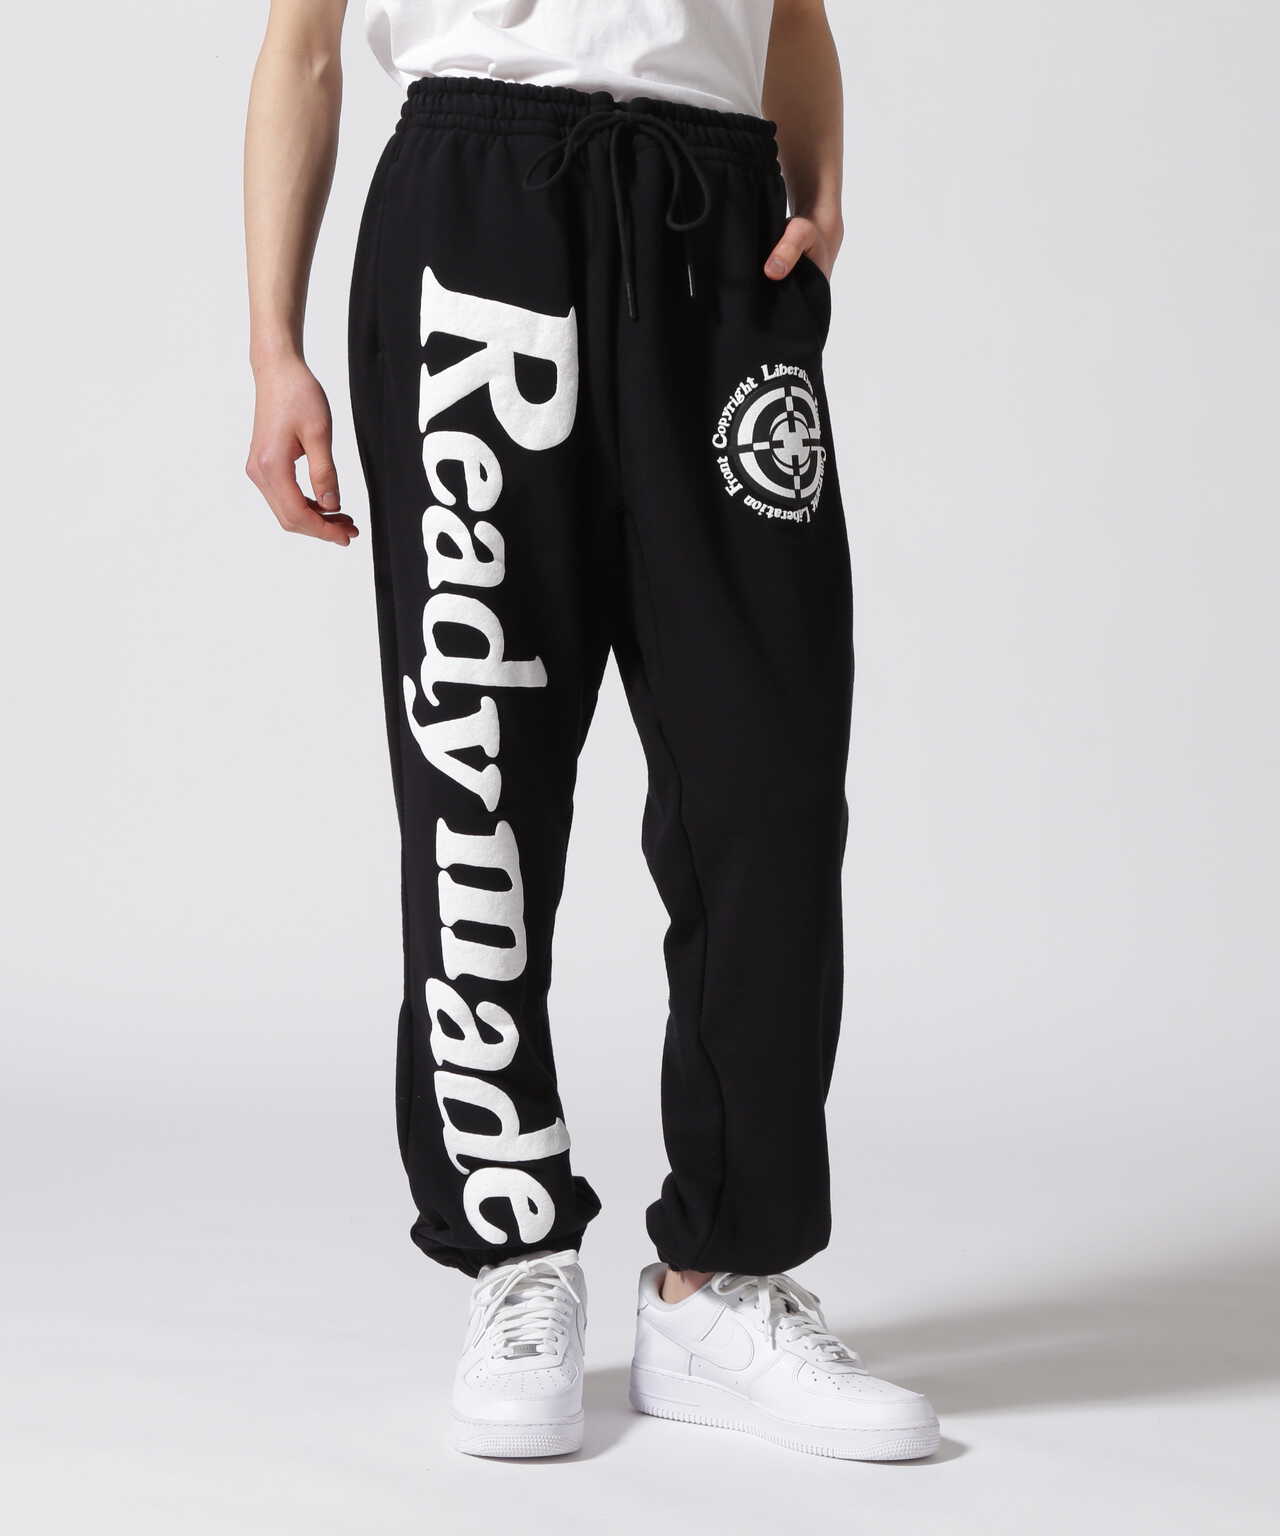 READYMADE Track Pant Size:0